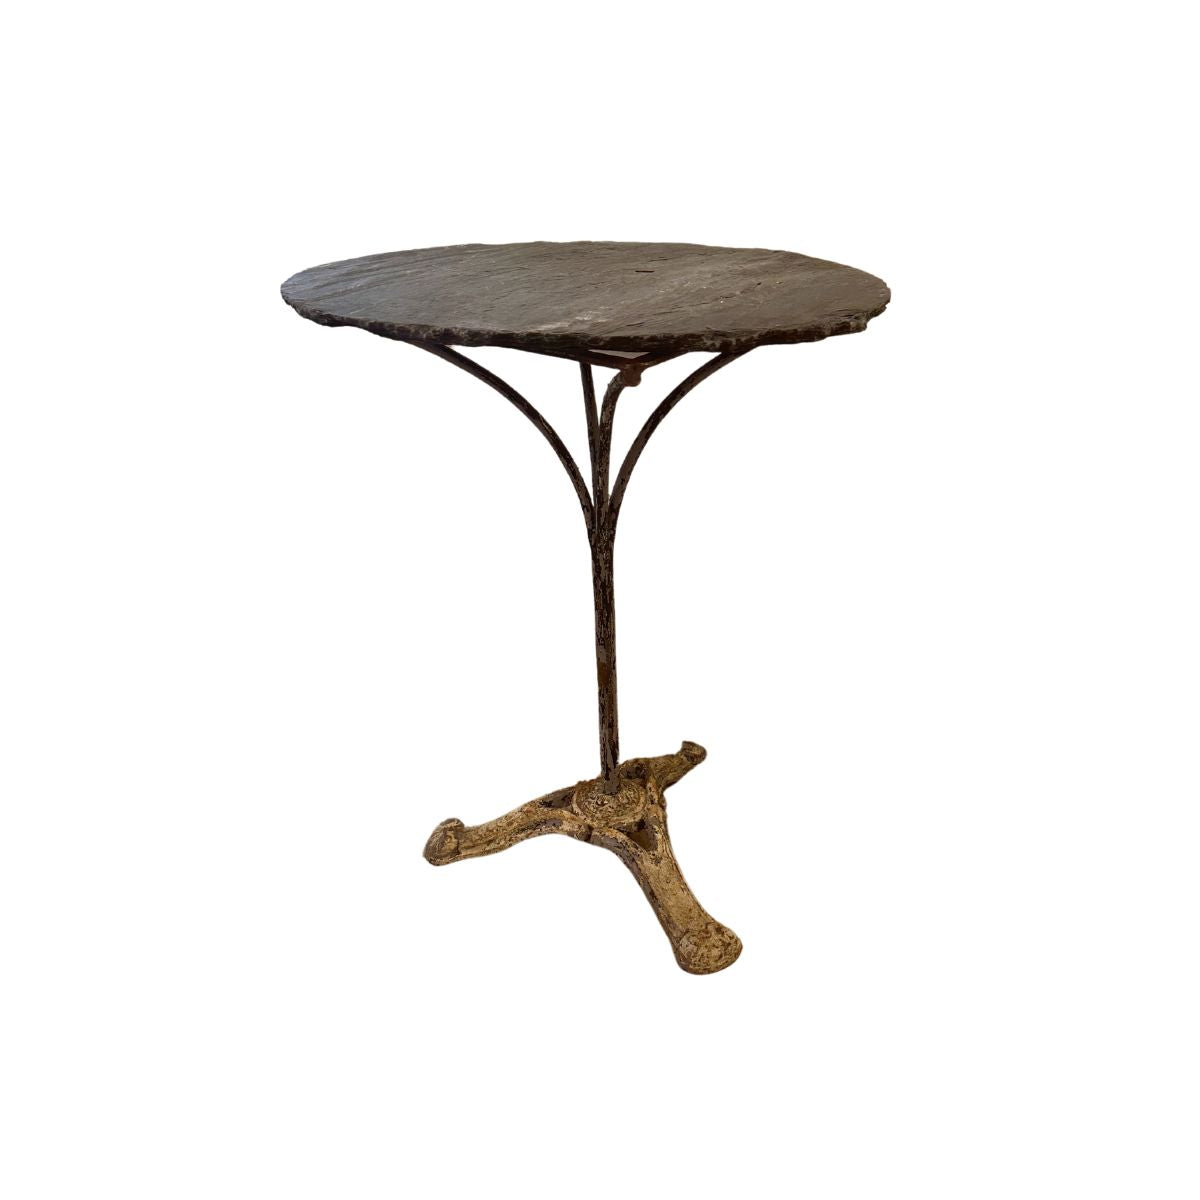 Weathered Antique Parisian Bistro Table with Slate Top